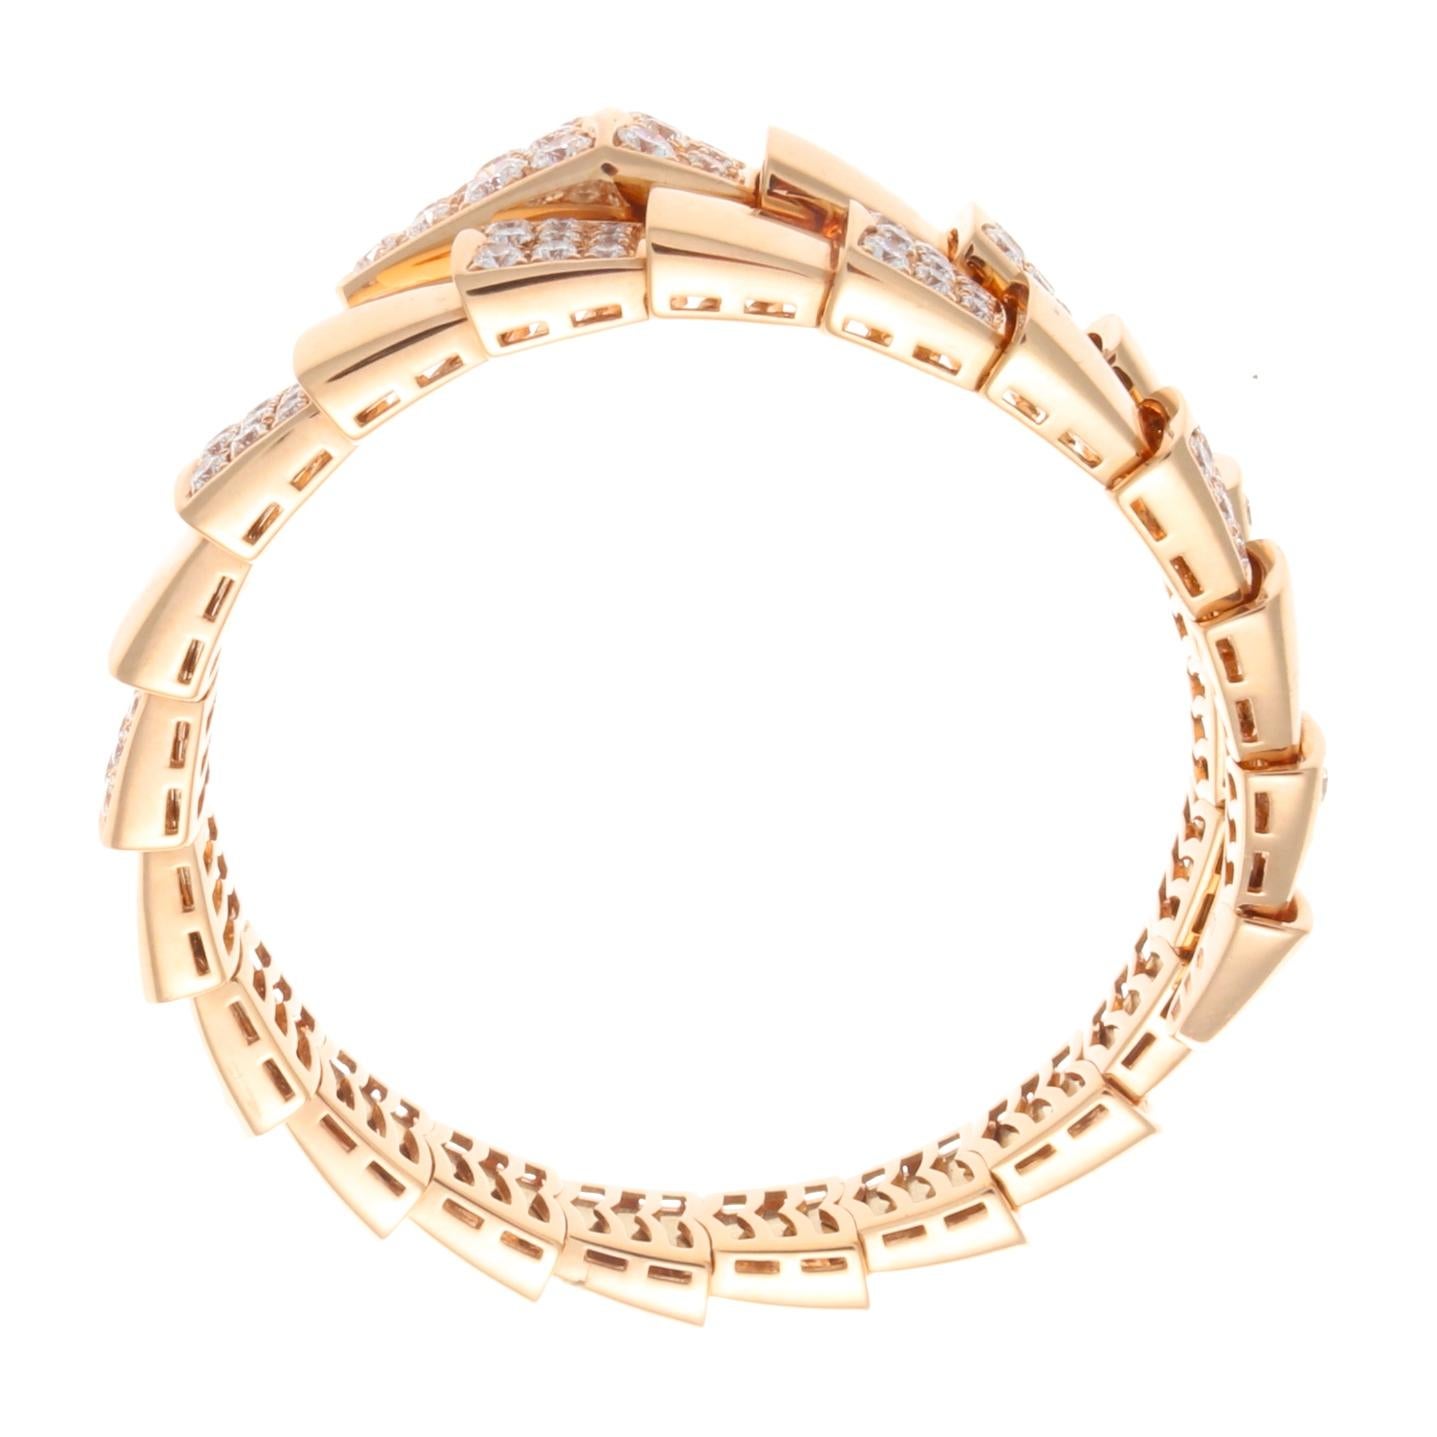 A historic motif representing wisdom, vitality and seduction dating back to ancient Greek and Roman mythology, the iconic Bulgari serpent. Designed in glistening 18k rose gold,  embedded with approximately 3.50 carats of collection super white, VVS,